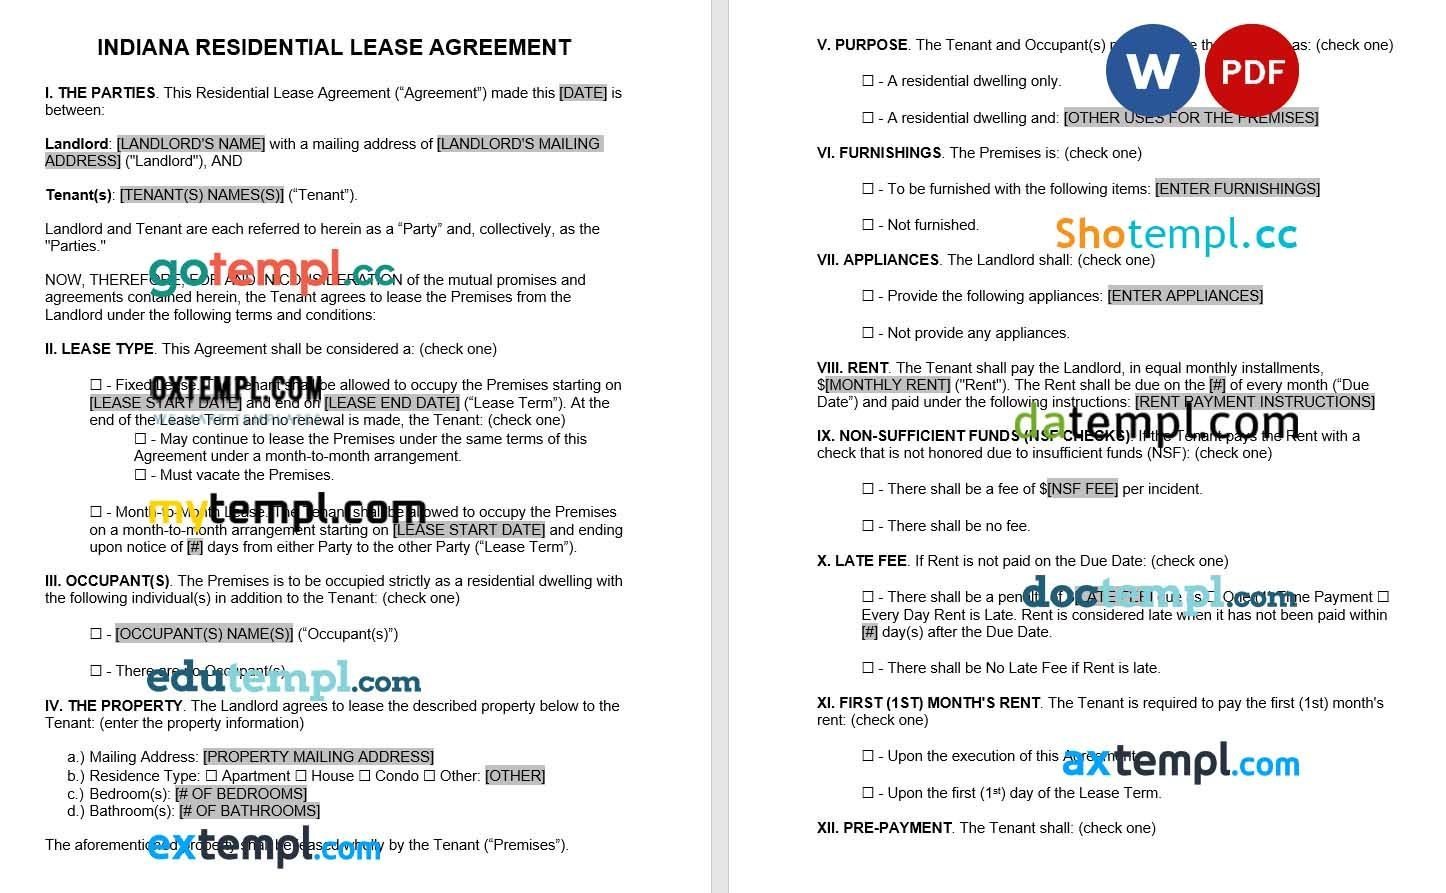 Indianna Standard Residential Lease Agreement Word example, fully editable